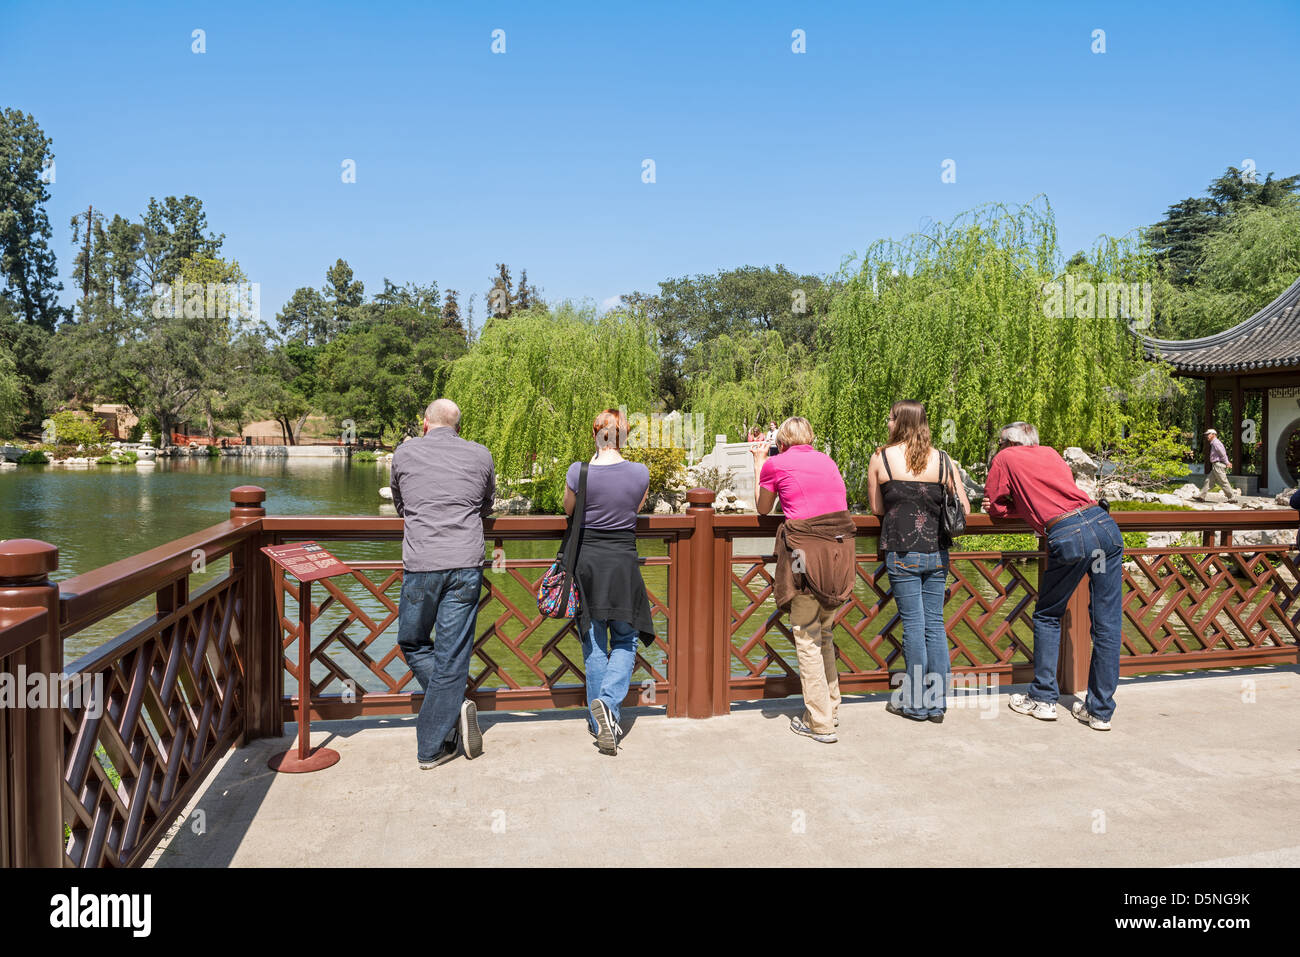 Chinese Garden at the Huntington Library. Stock Photo